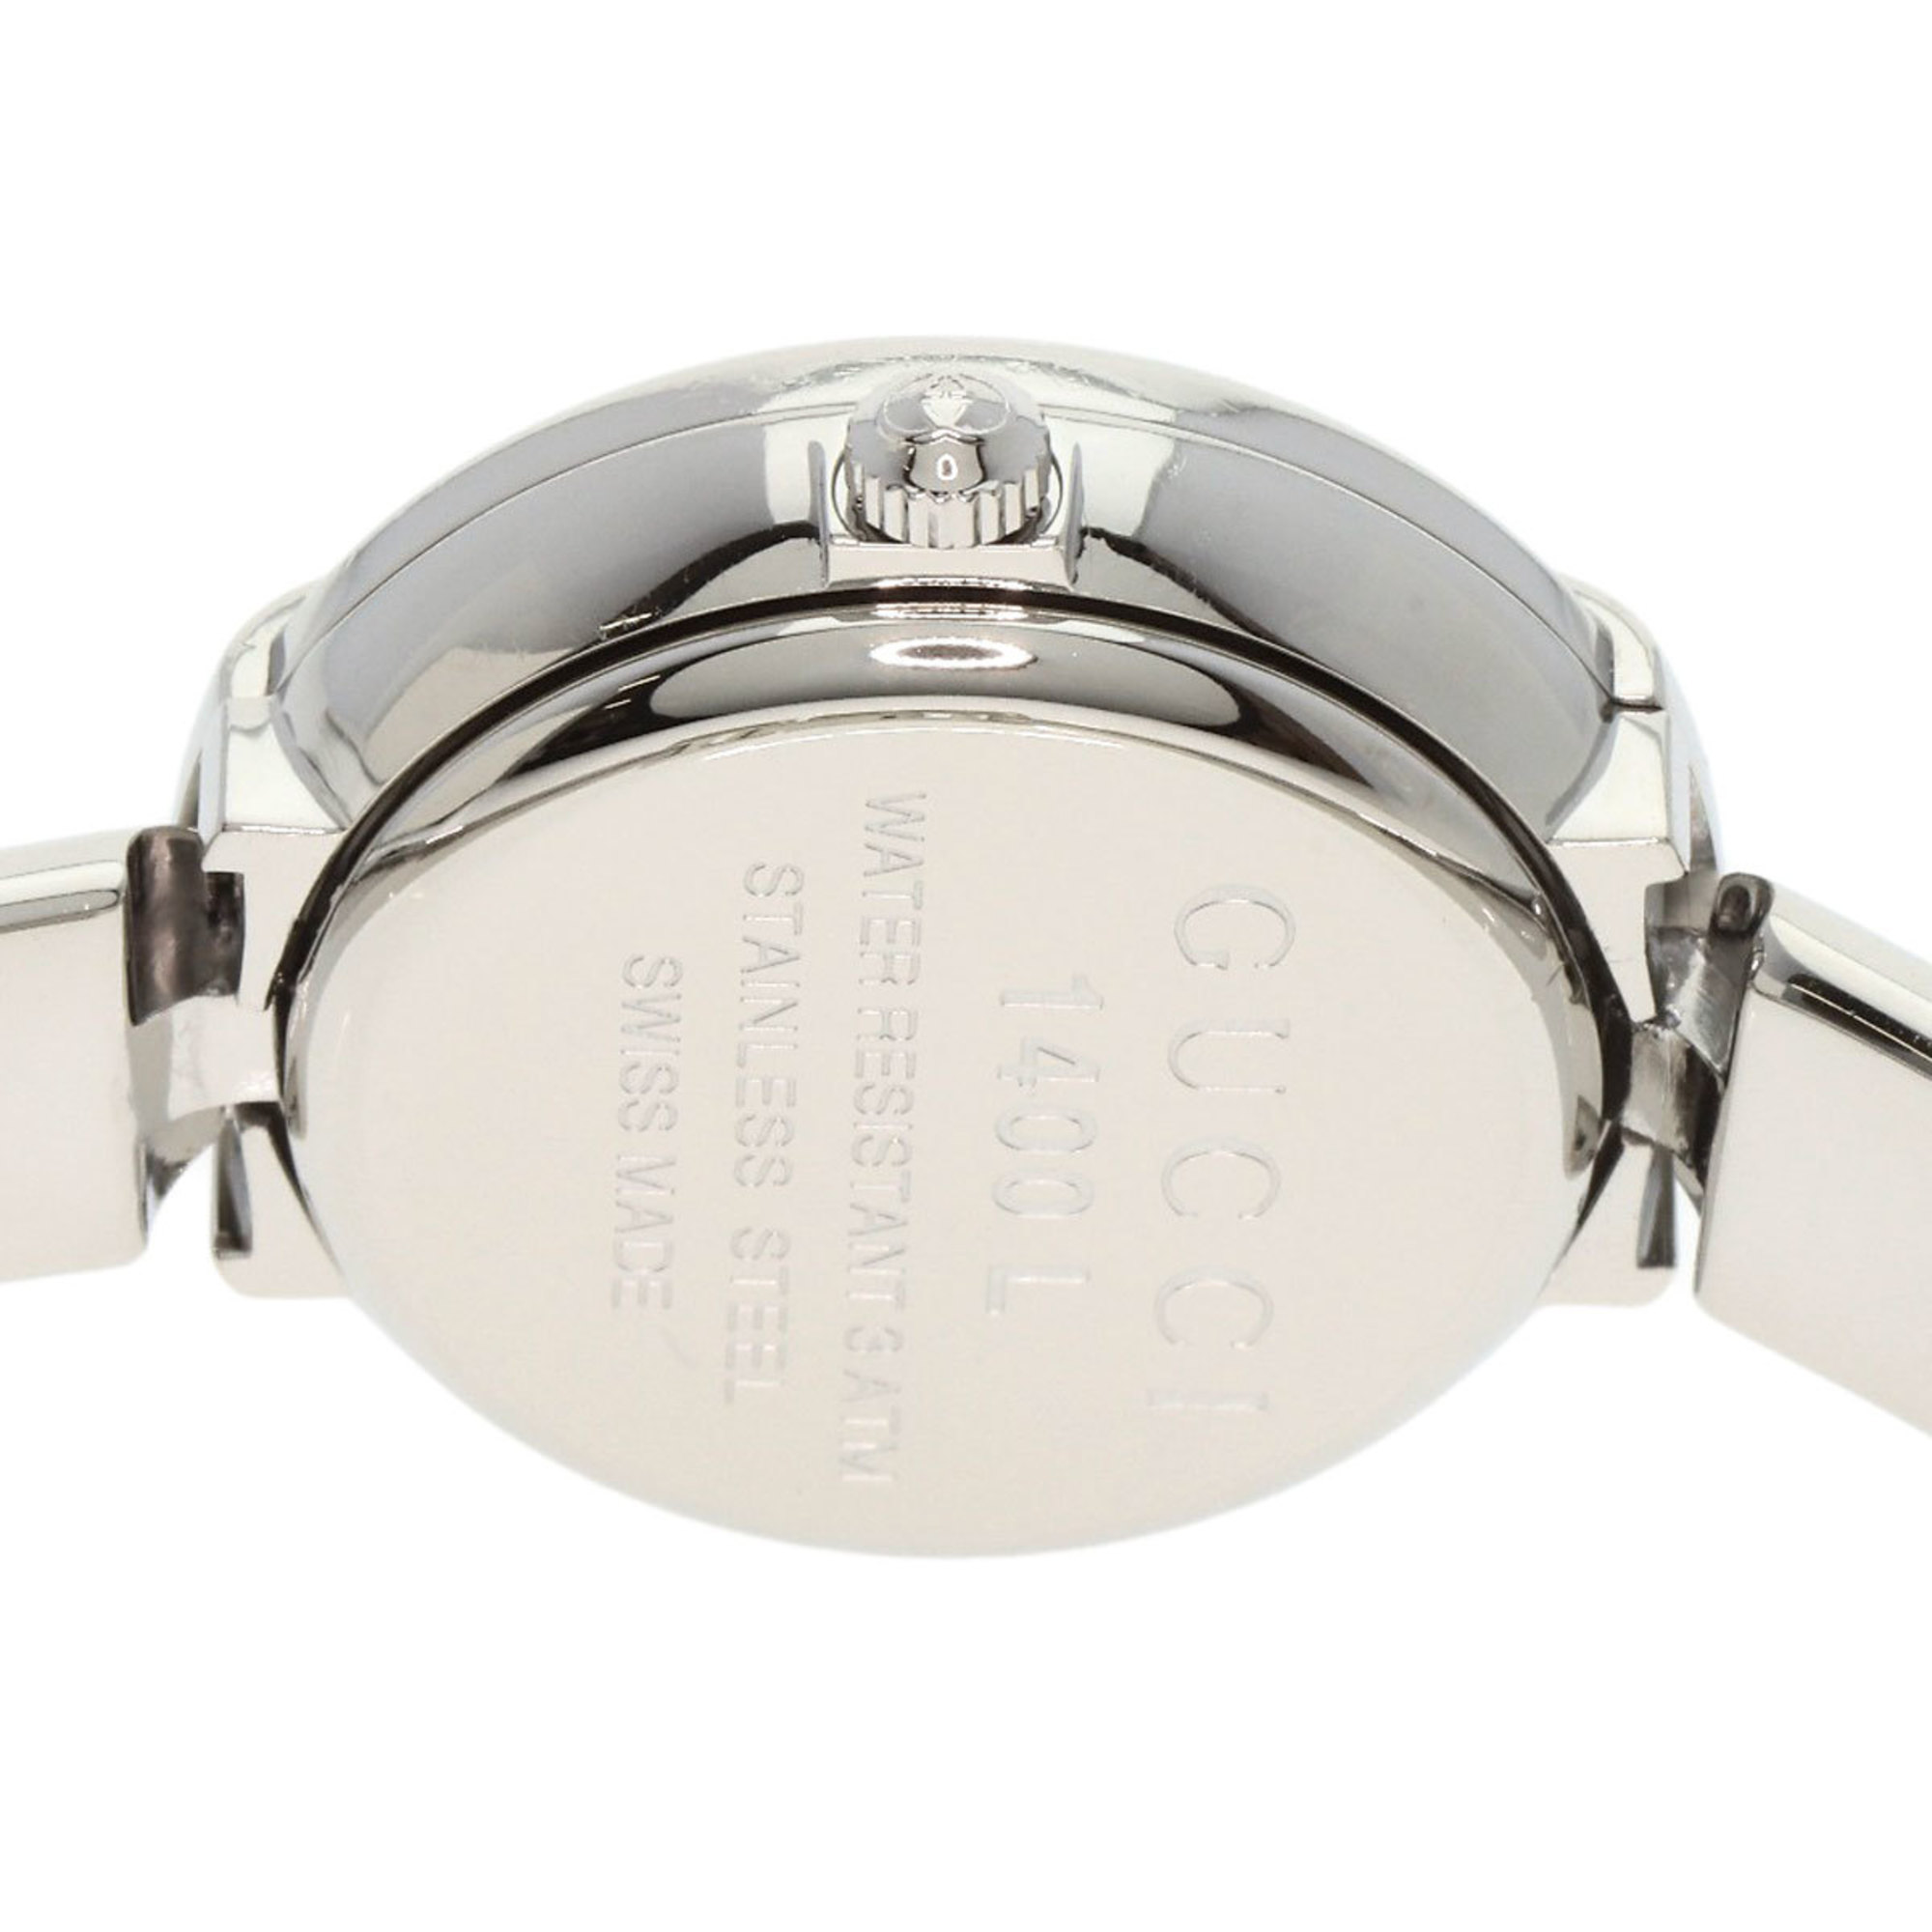 Gucci 1400L Watch Stainless Steel/SS Ladies GUCCI